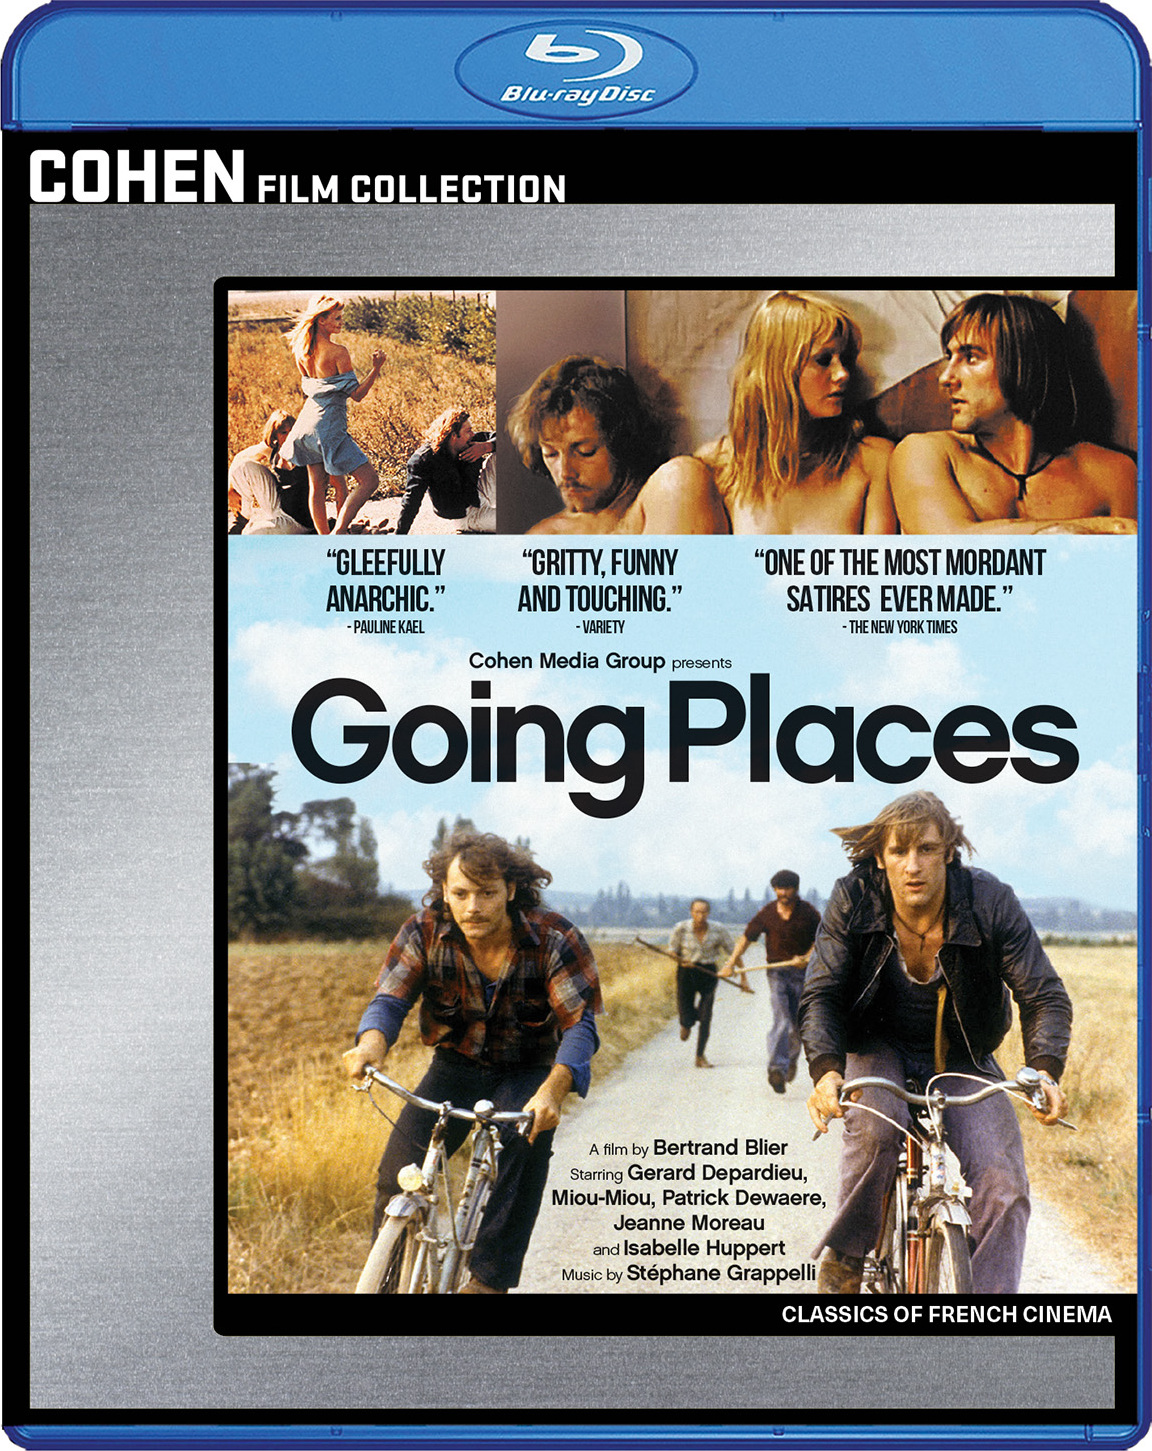 going places (1974 film)